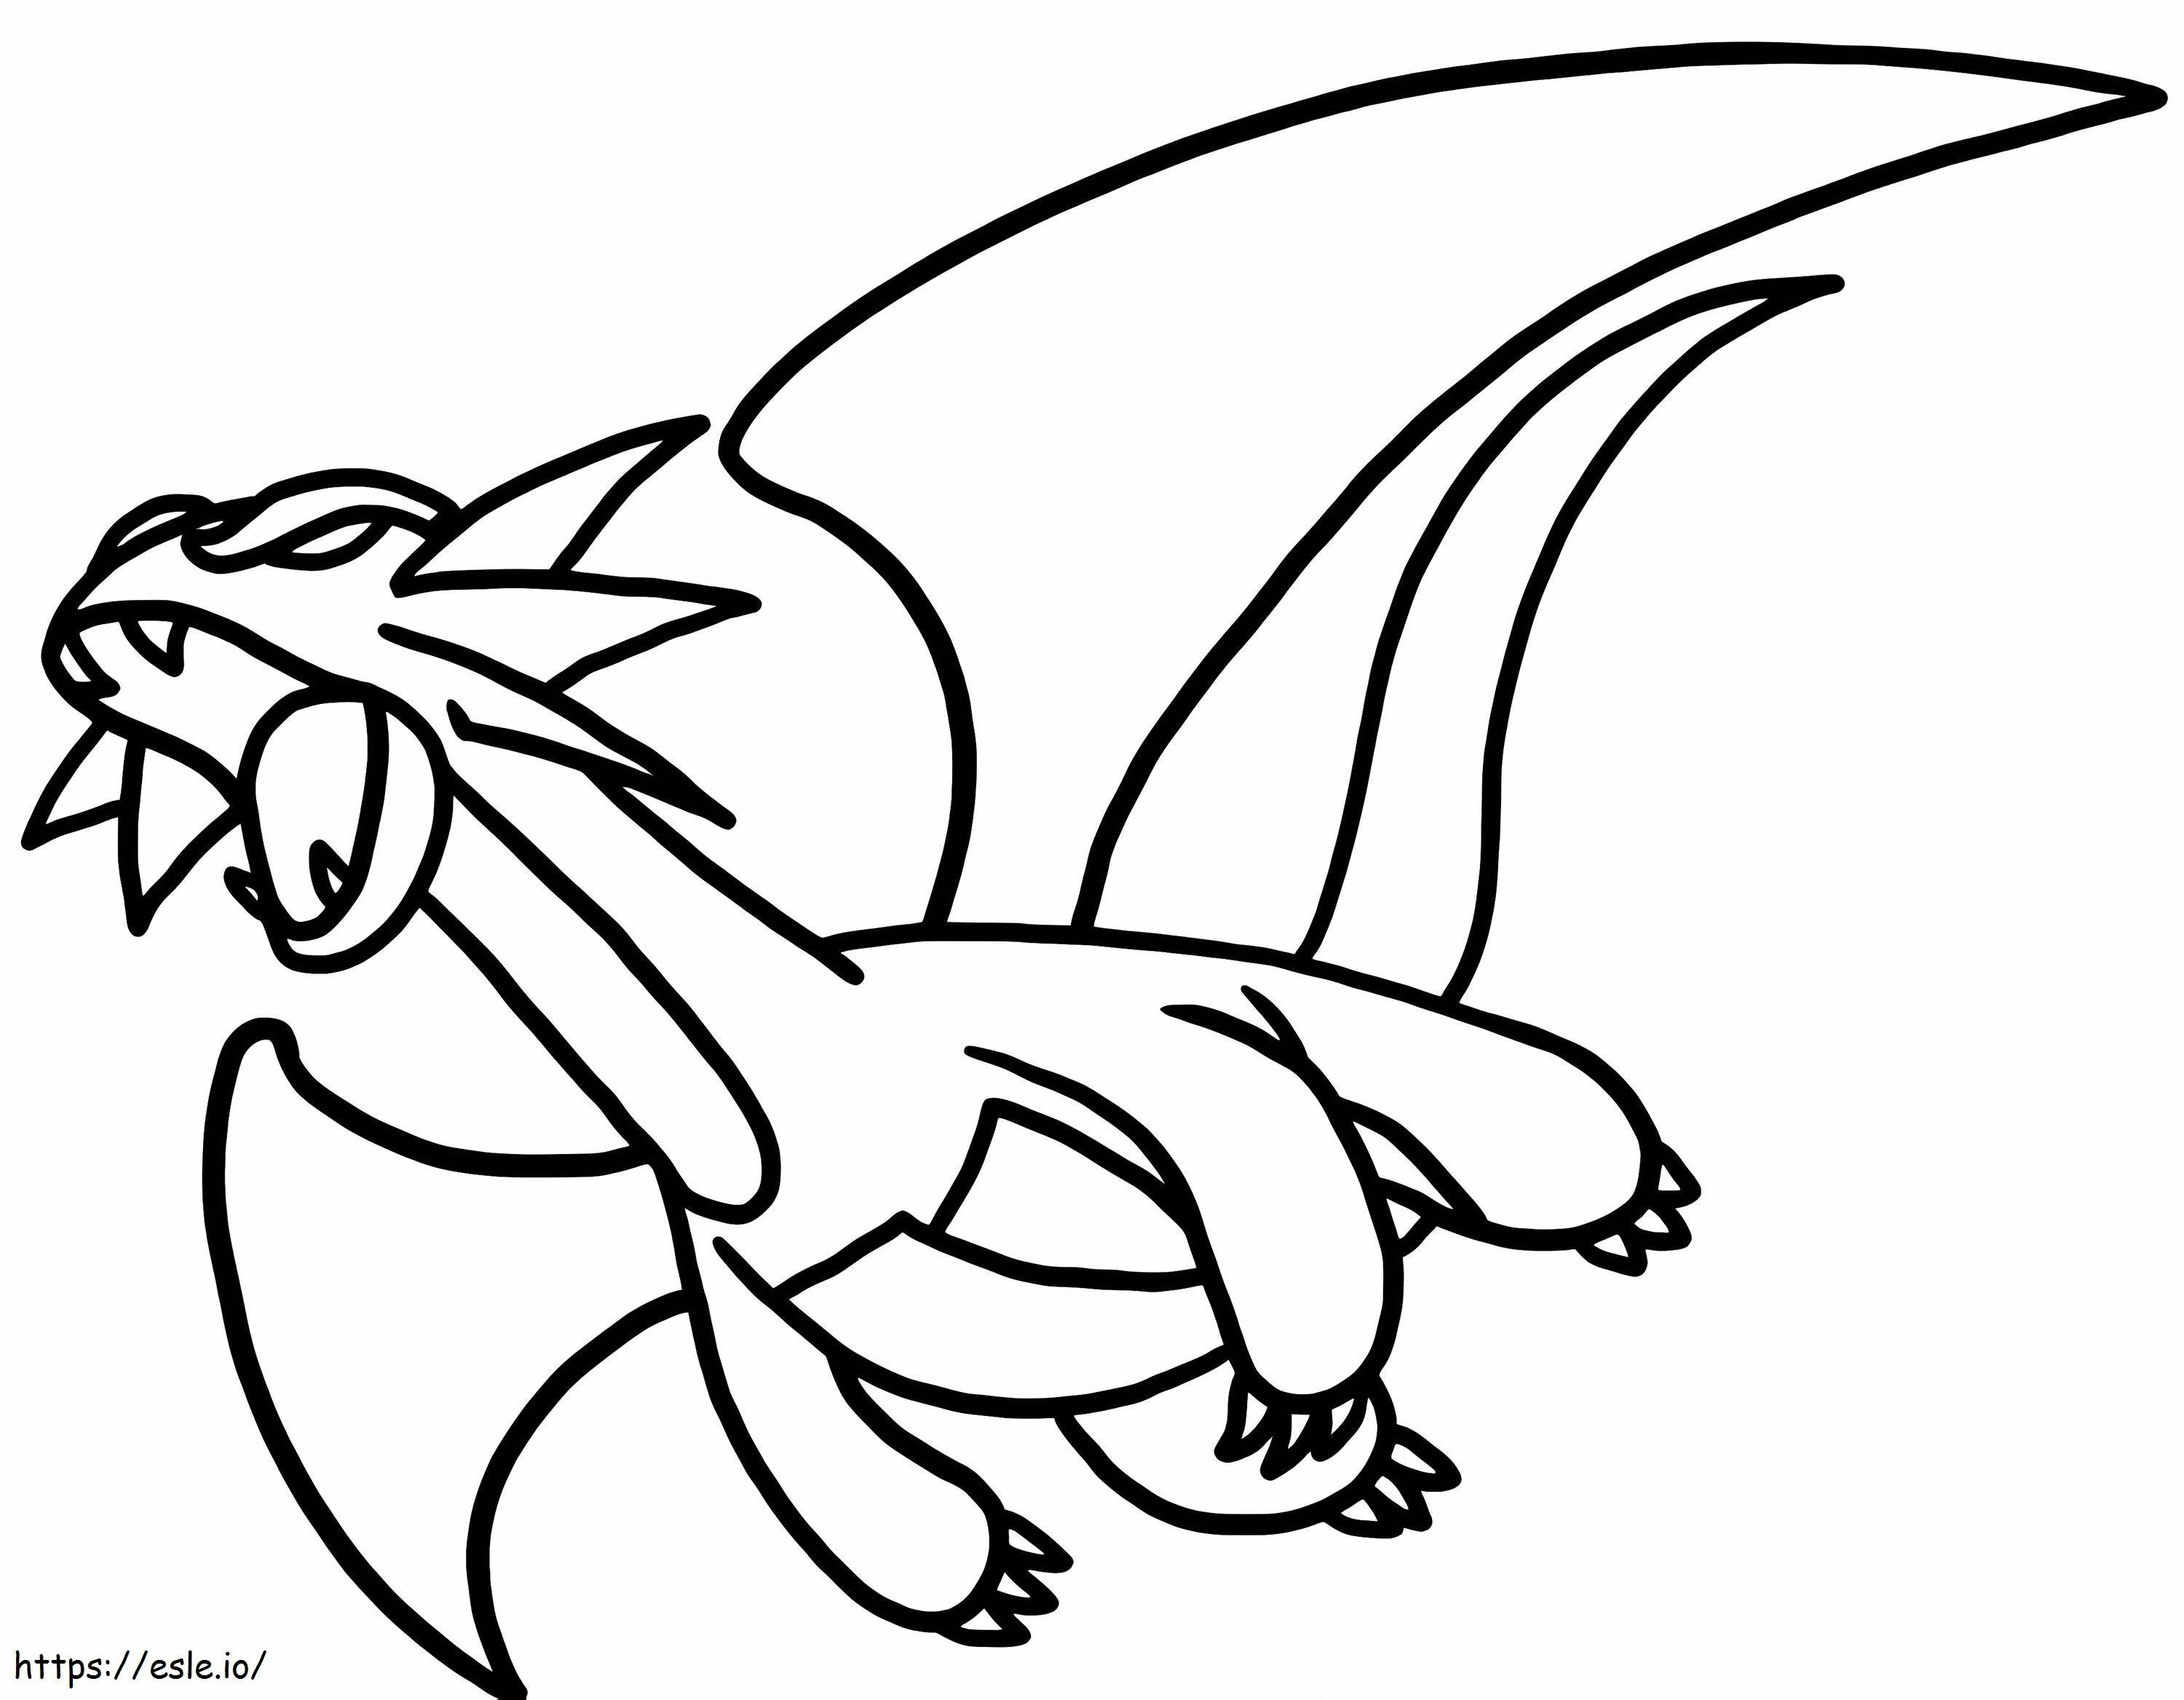 Salamence 5 coloring page